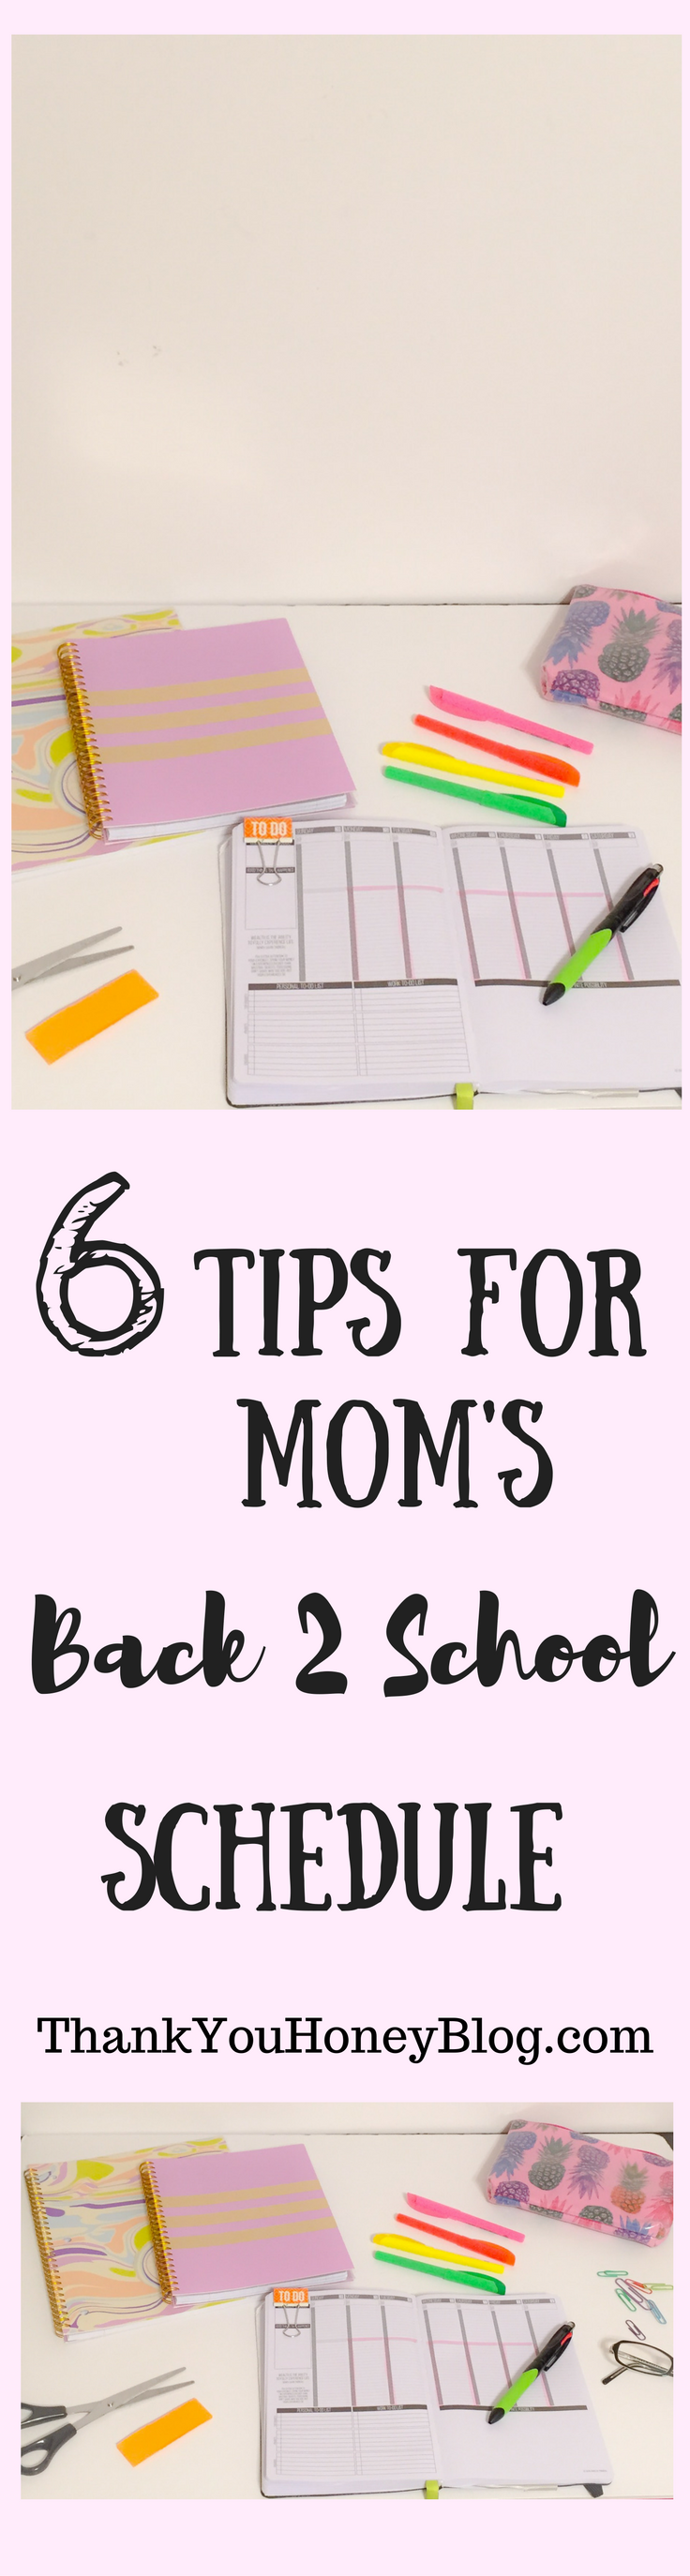 6 Tips to Tackle Mom`s Back 2 School Schedule #PositivelyPrepared #BacktoSchool {ad}